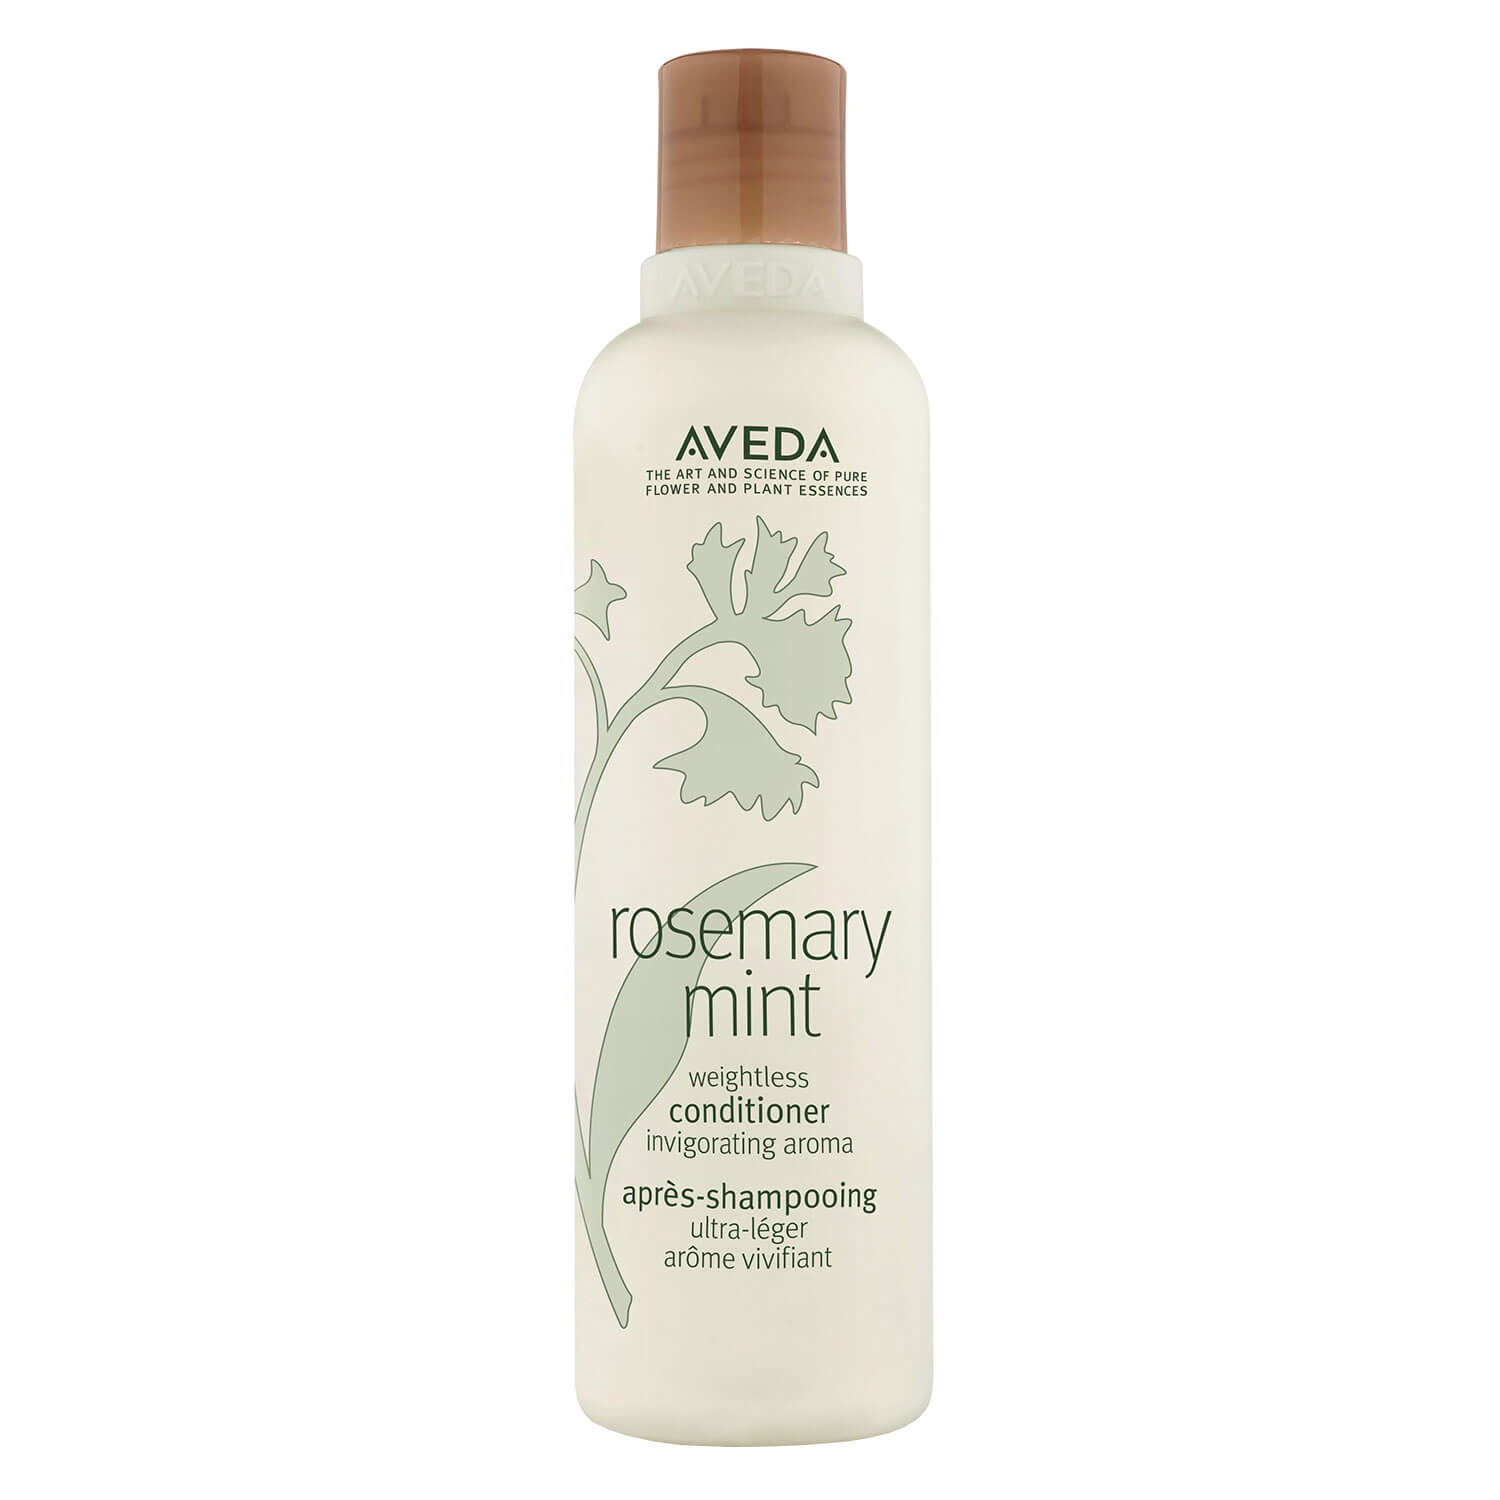 Product image from rosemary mint - weightless conditioner